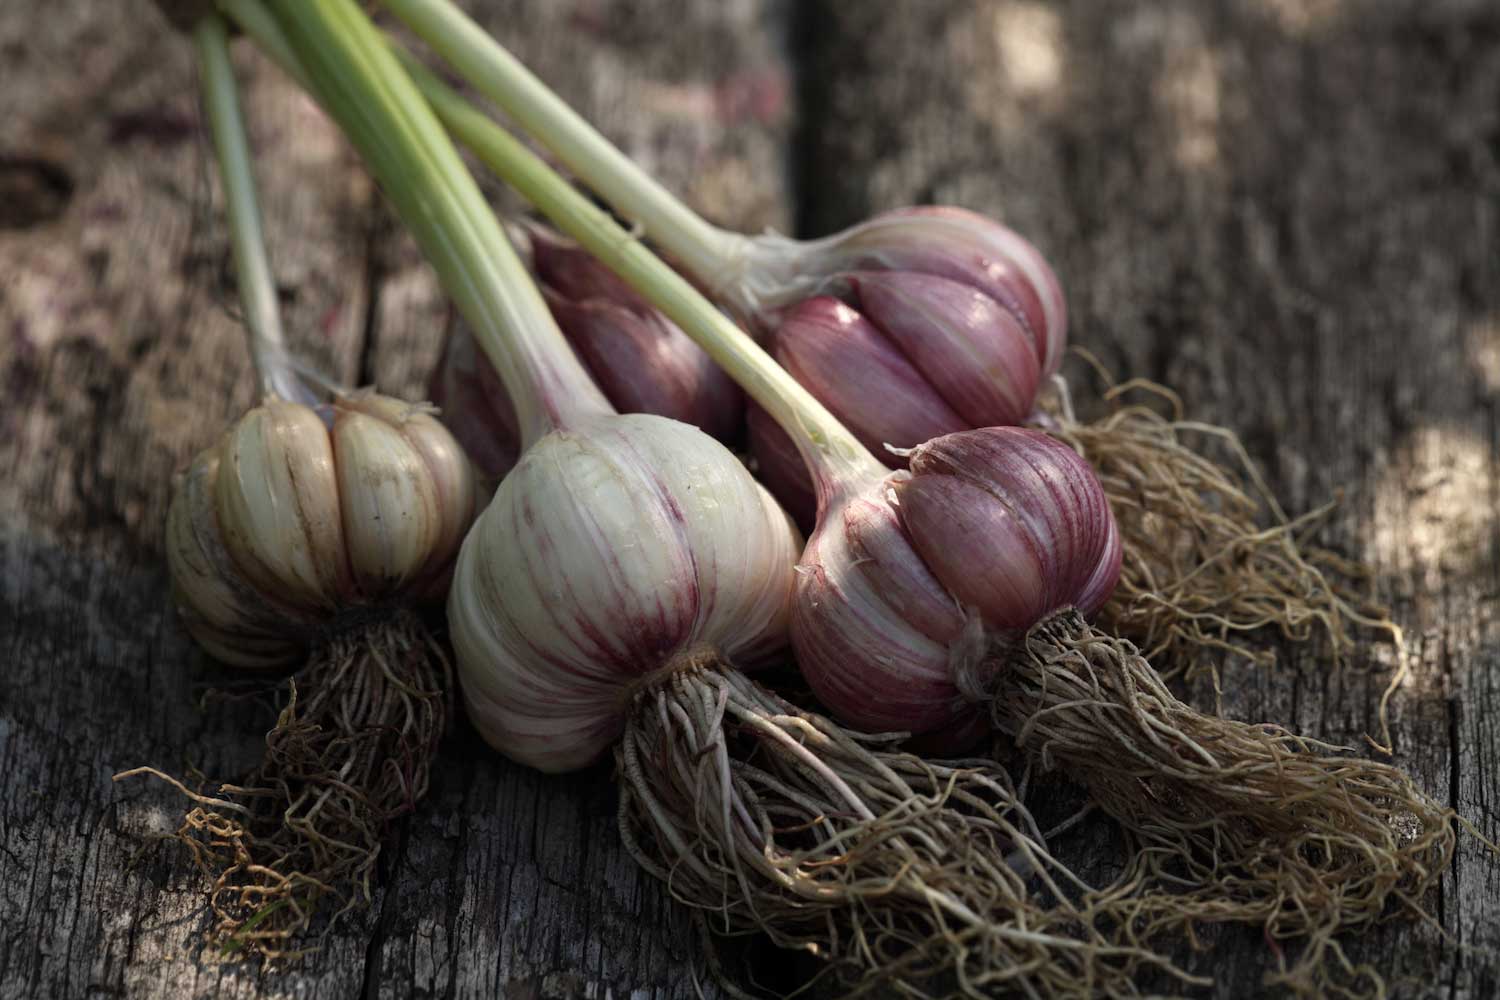 A group of five bulbs of garlic laying on wood.